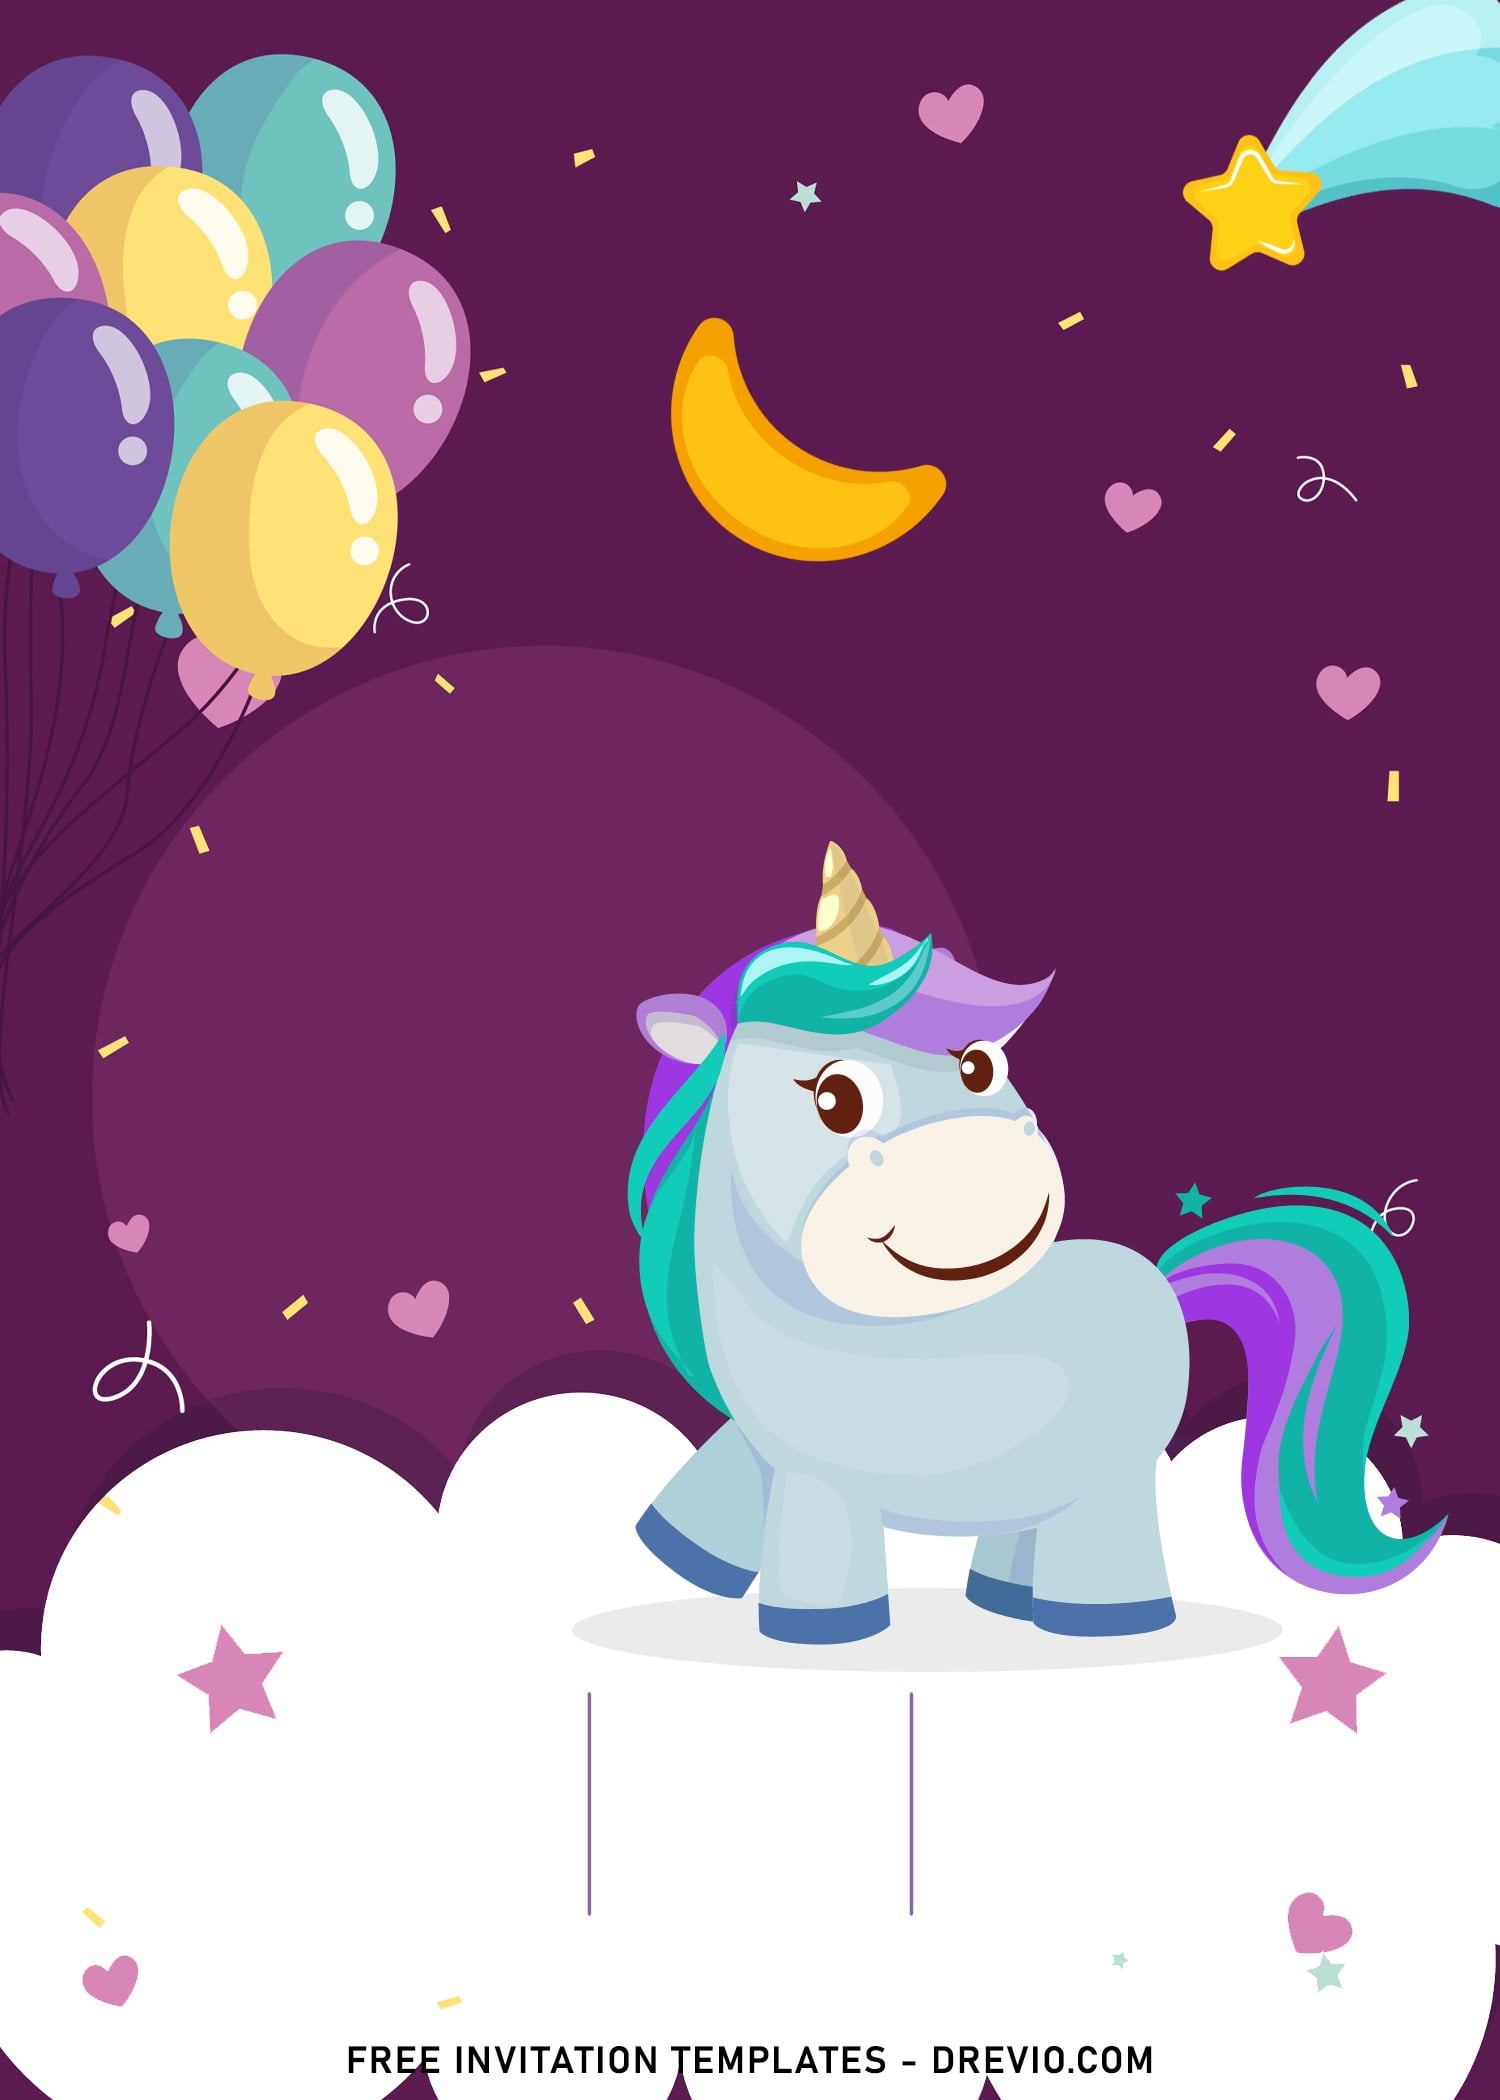 Cute Unicorn Background Design for Invitation for Whimsical Party ...